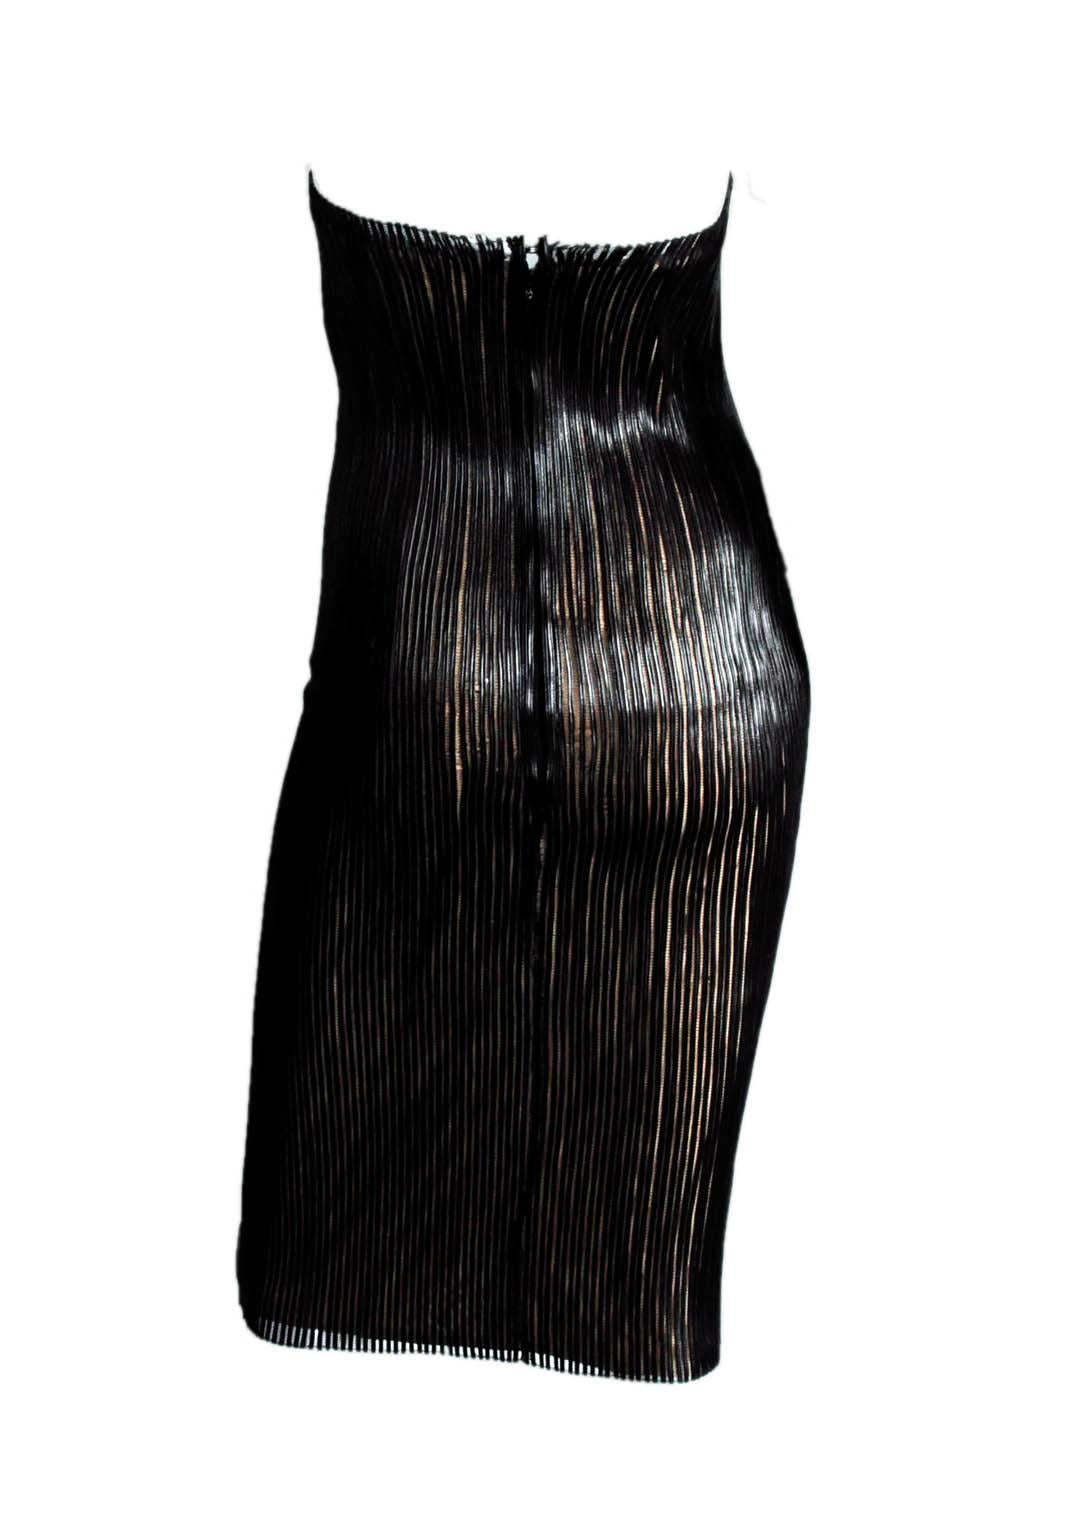 The Iconic Tom Ford Gucci SS 2001 Black Leather Nude Corset Runway Dress Kate Wore!

Who could ever forget that incredible nude corset dress with the tulle overlay covered with black leather strips from Tom Ford's incredible spring/summer 2001